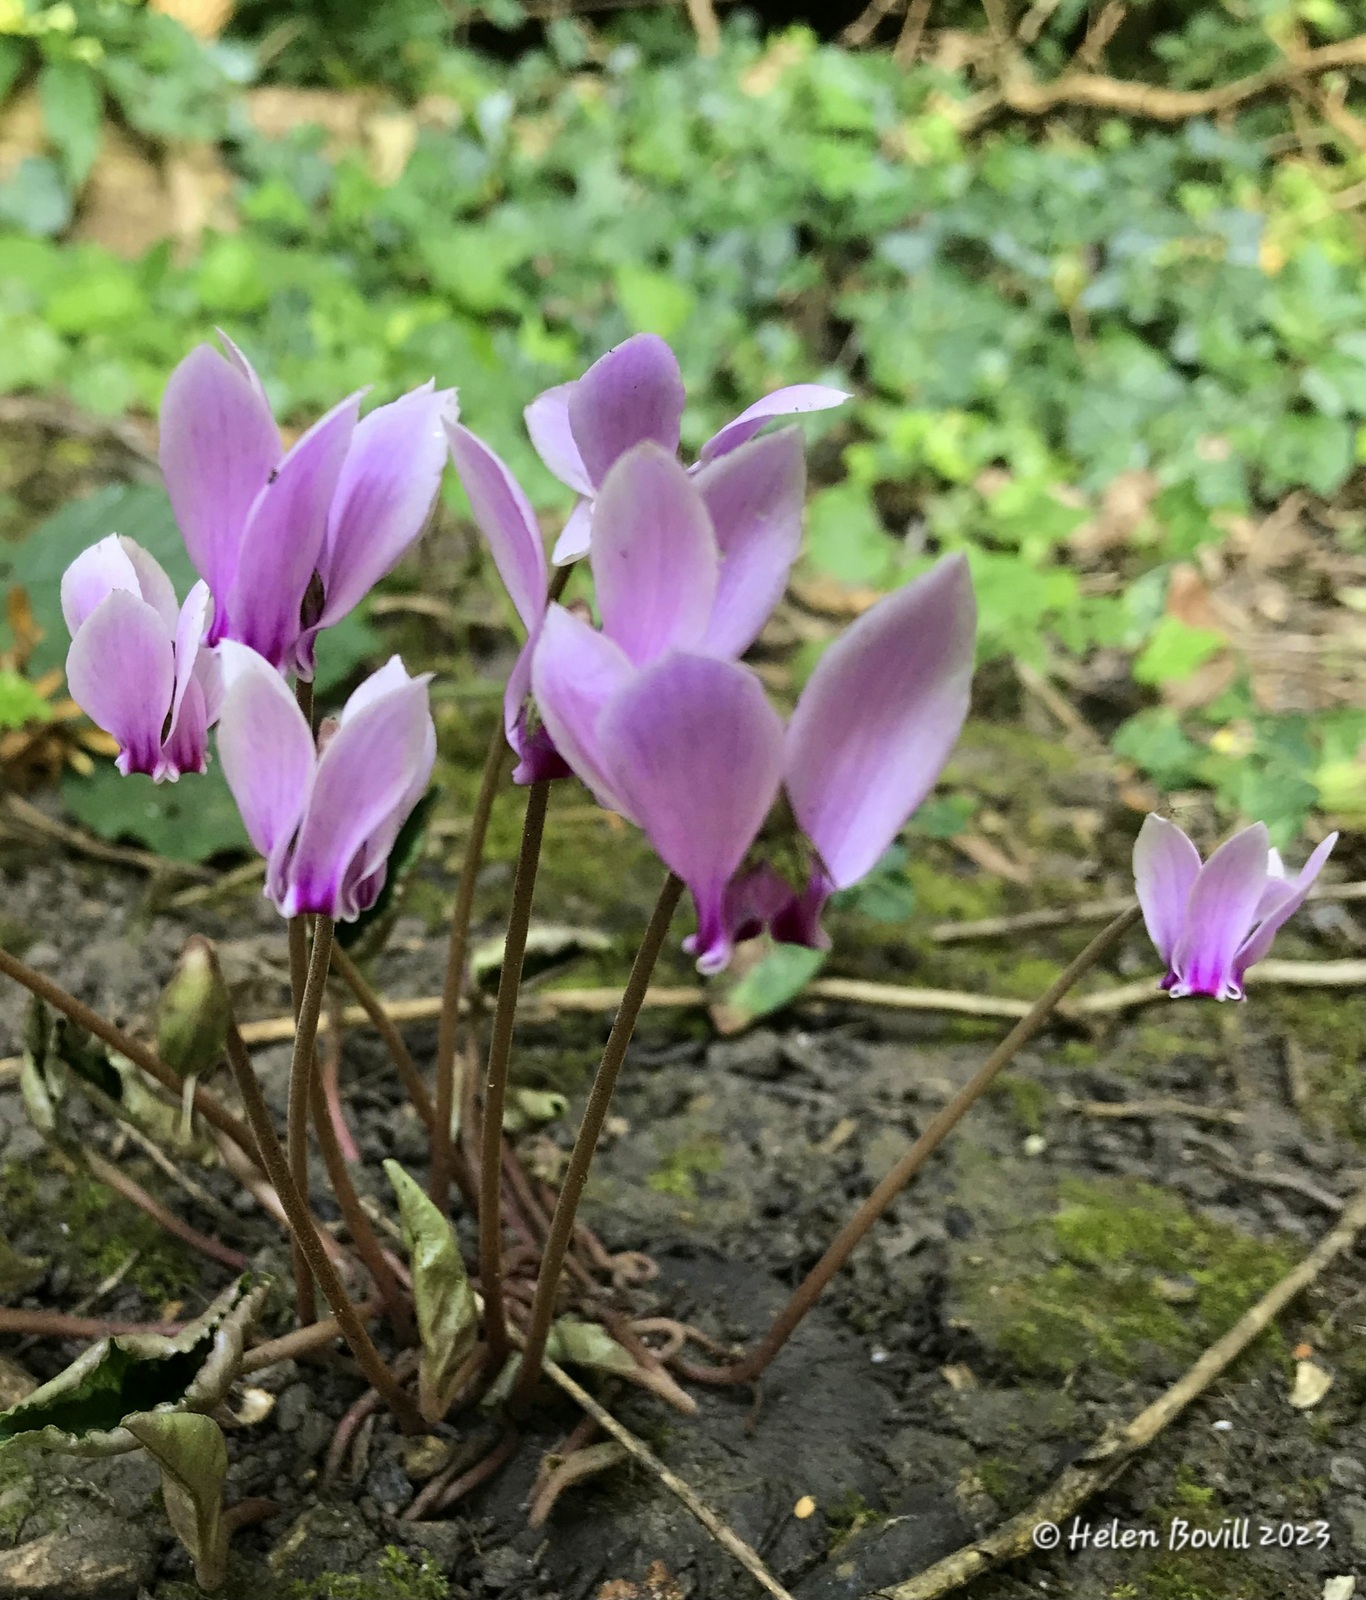 Pink flowers of Cyclamen, growing in the cemetery